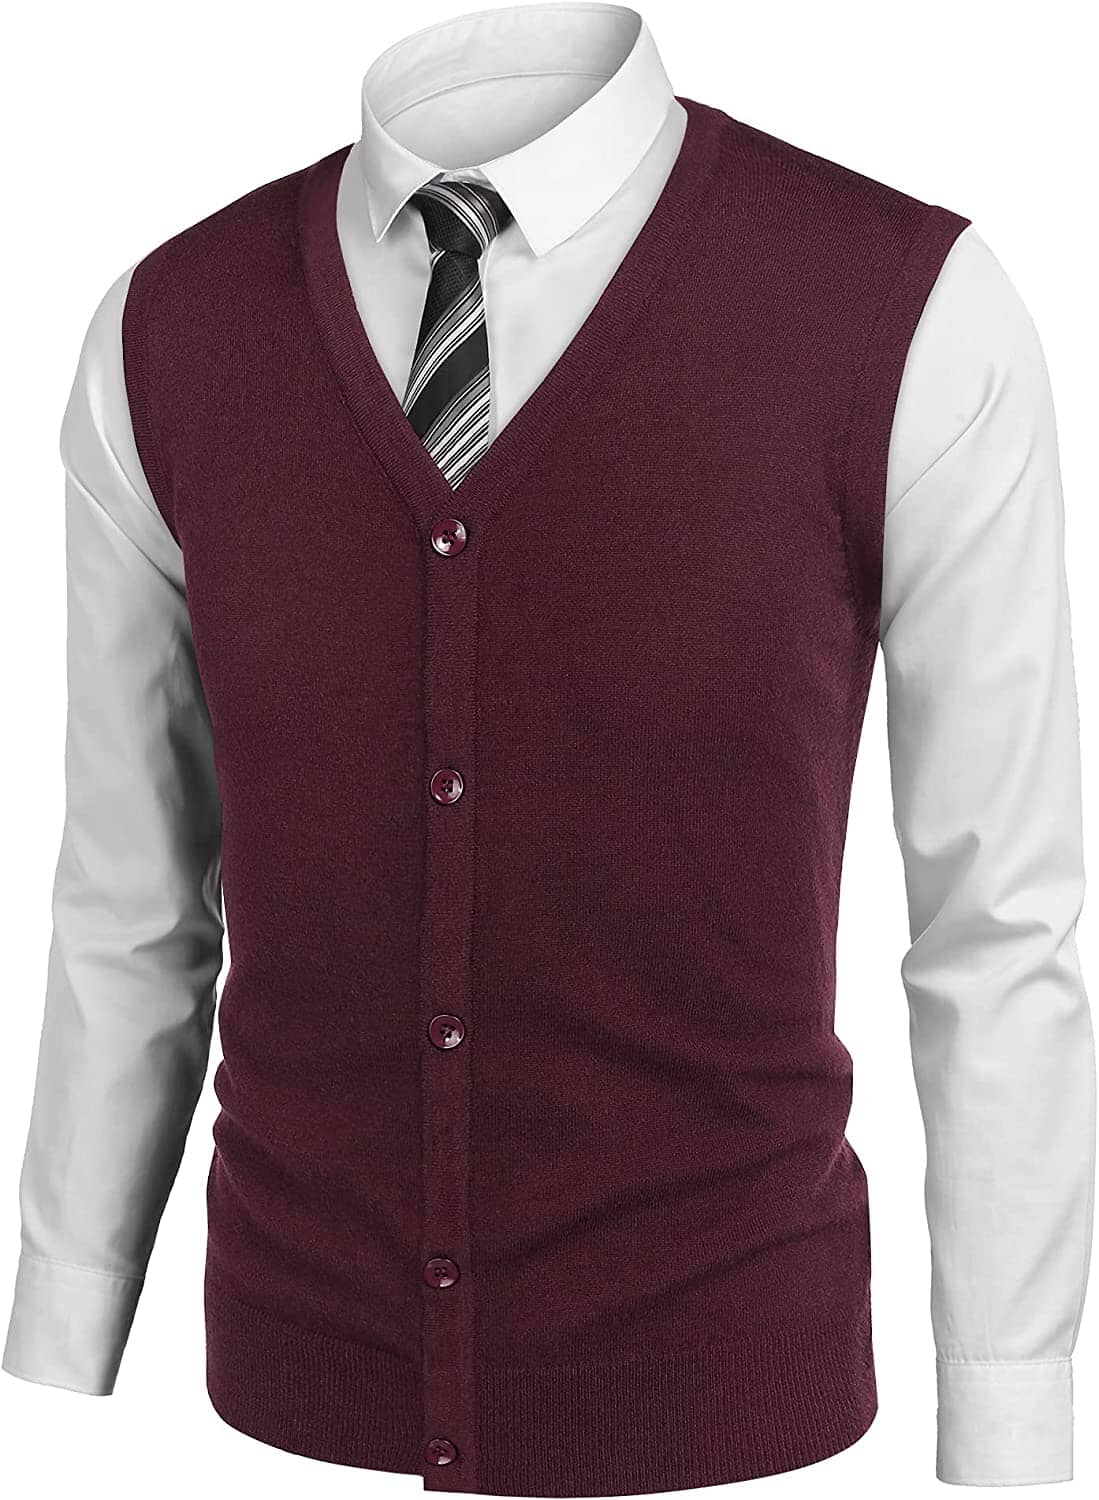 Casual Sleeveless Knitted Button Cardigan Vest (US Only) Vest COOFANDY Store Wine Red S 